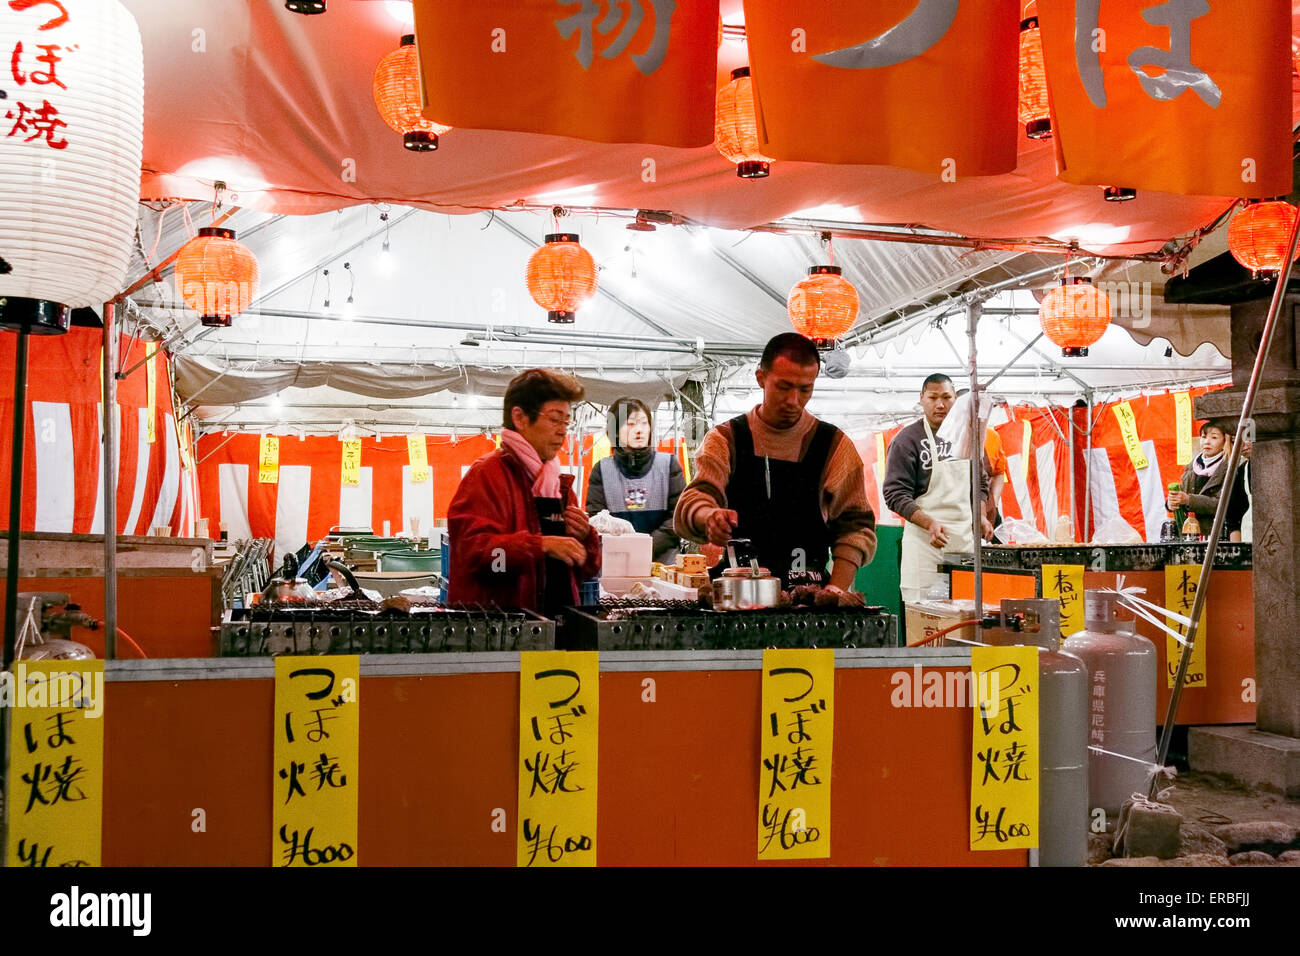 Japanese woman and man, facing, preparing tsuboyaki, turben shells, typical festival food, on a food stall, combined with others, at night. Stock Photo